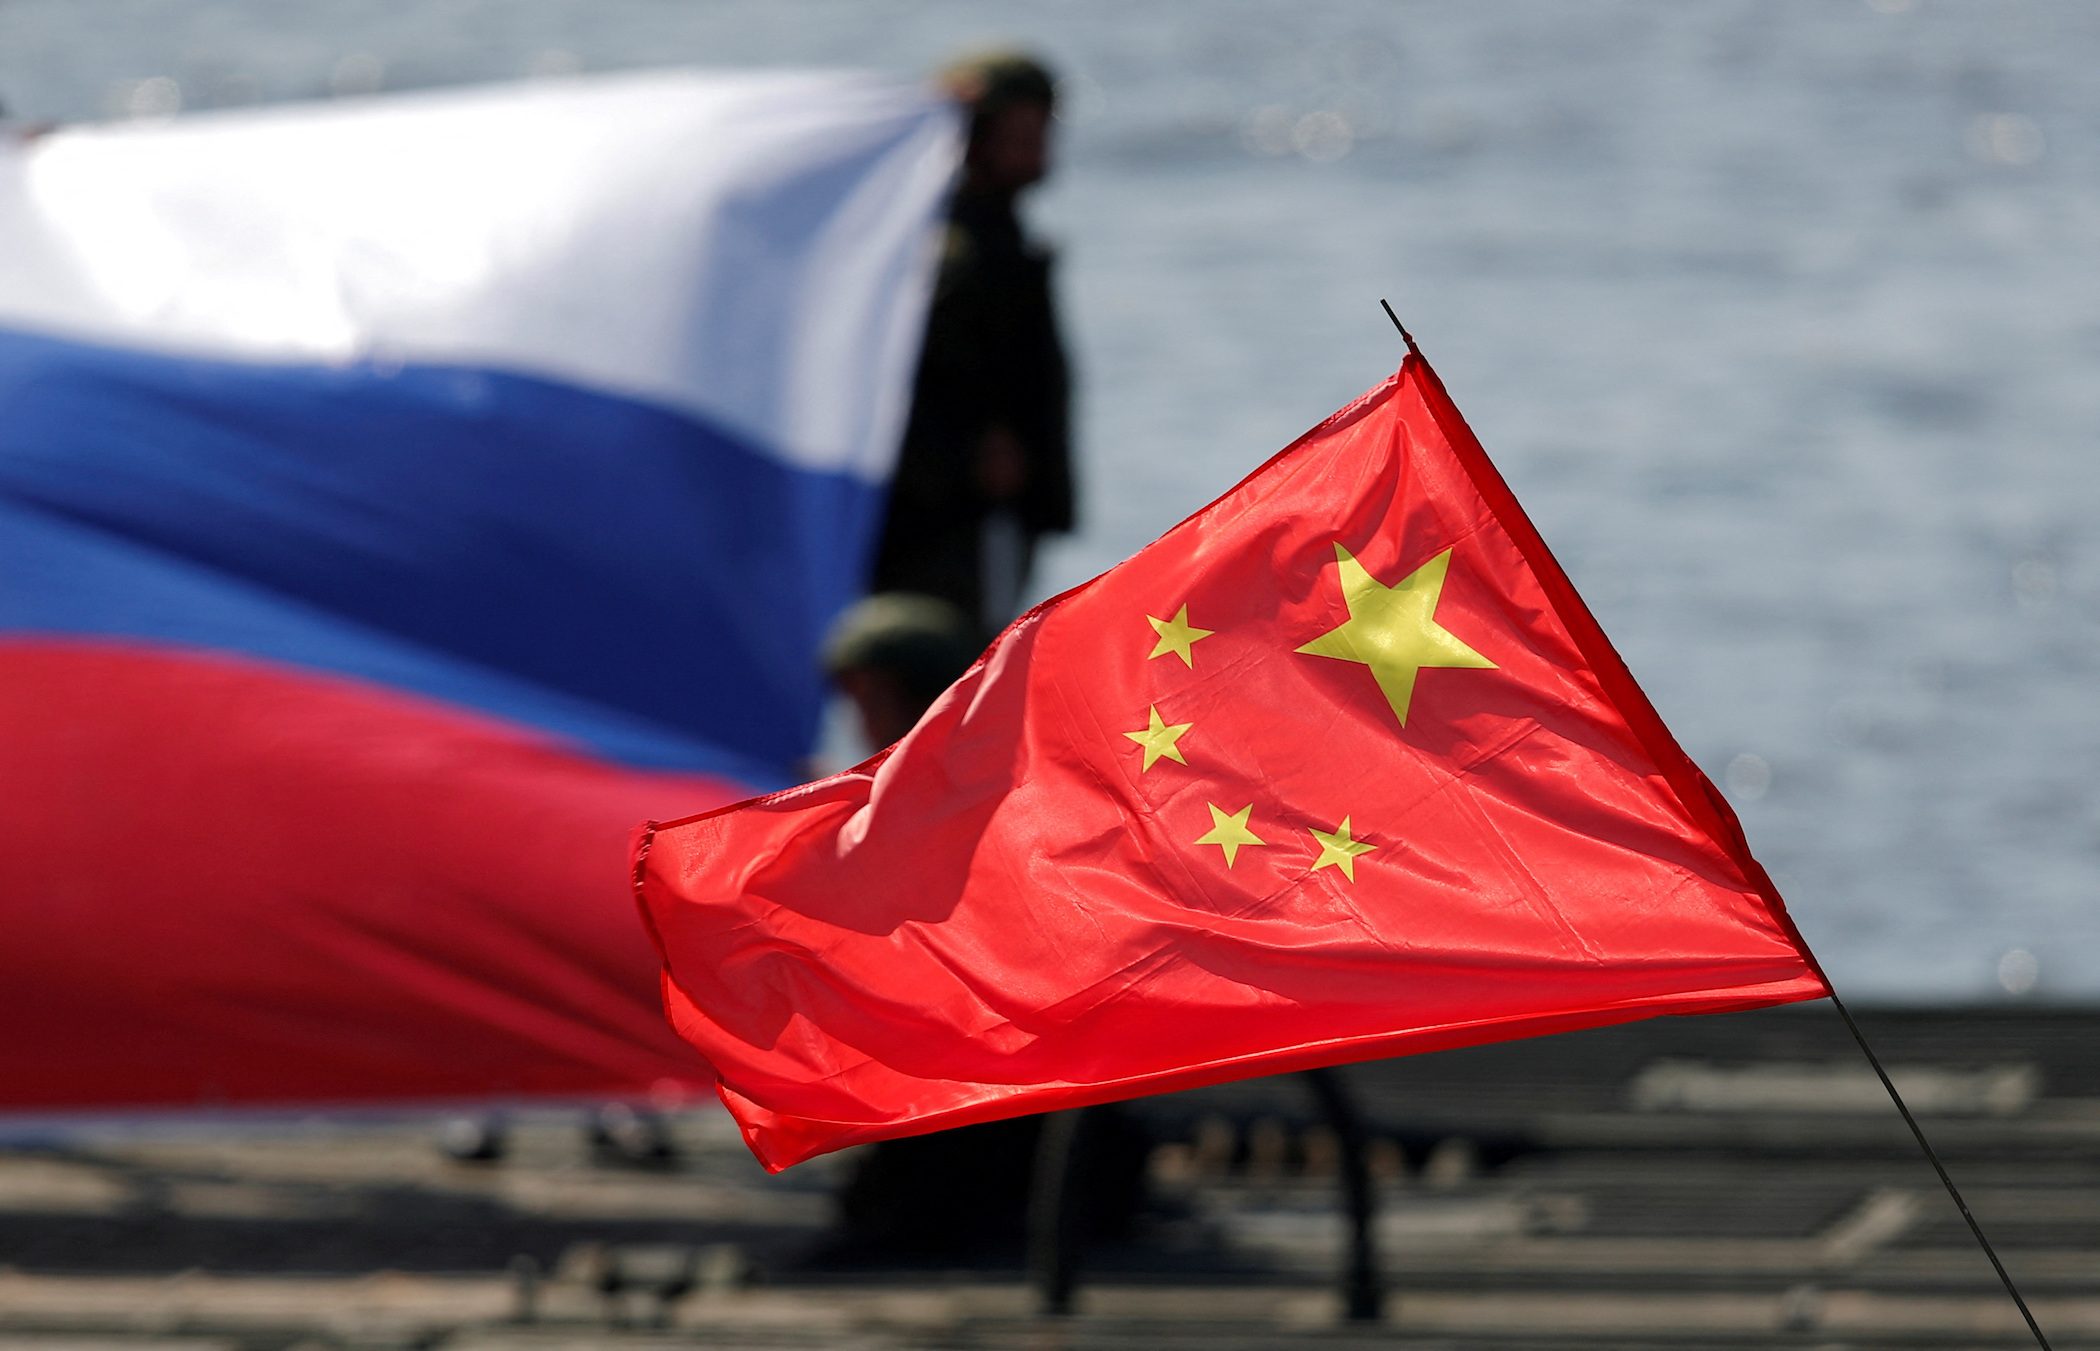 A year since Russian invasion, China continues to aid in disinfo efforts in Ukraine